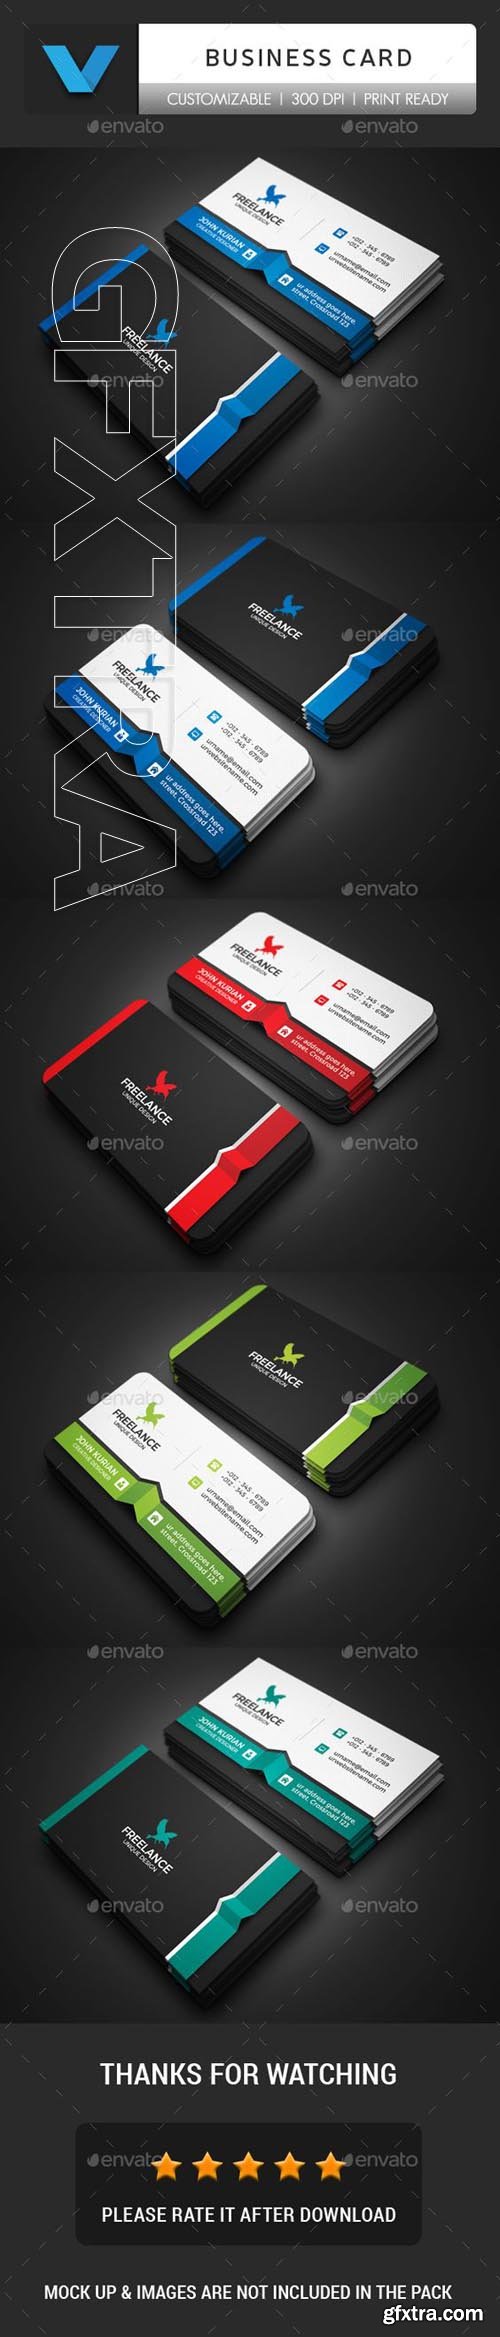 GraphicRiver - Freelance Business Card 20442808 20442808